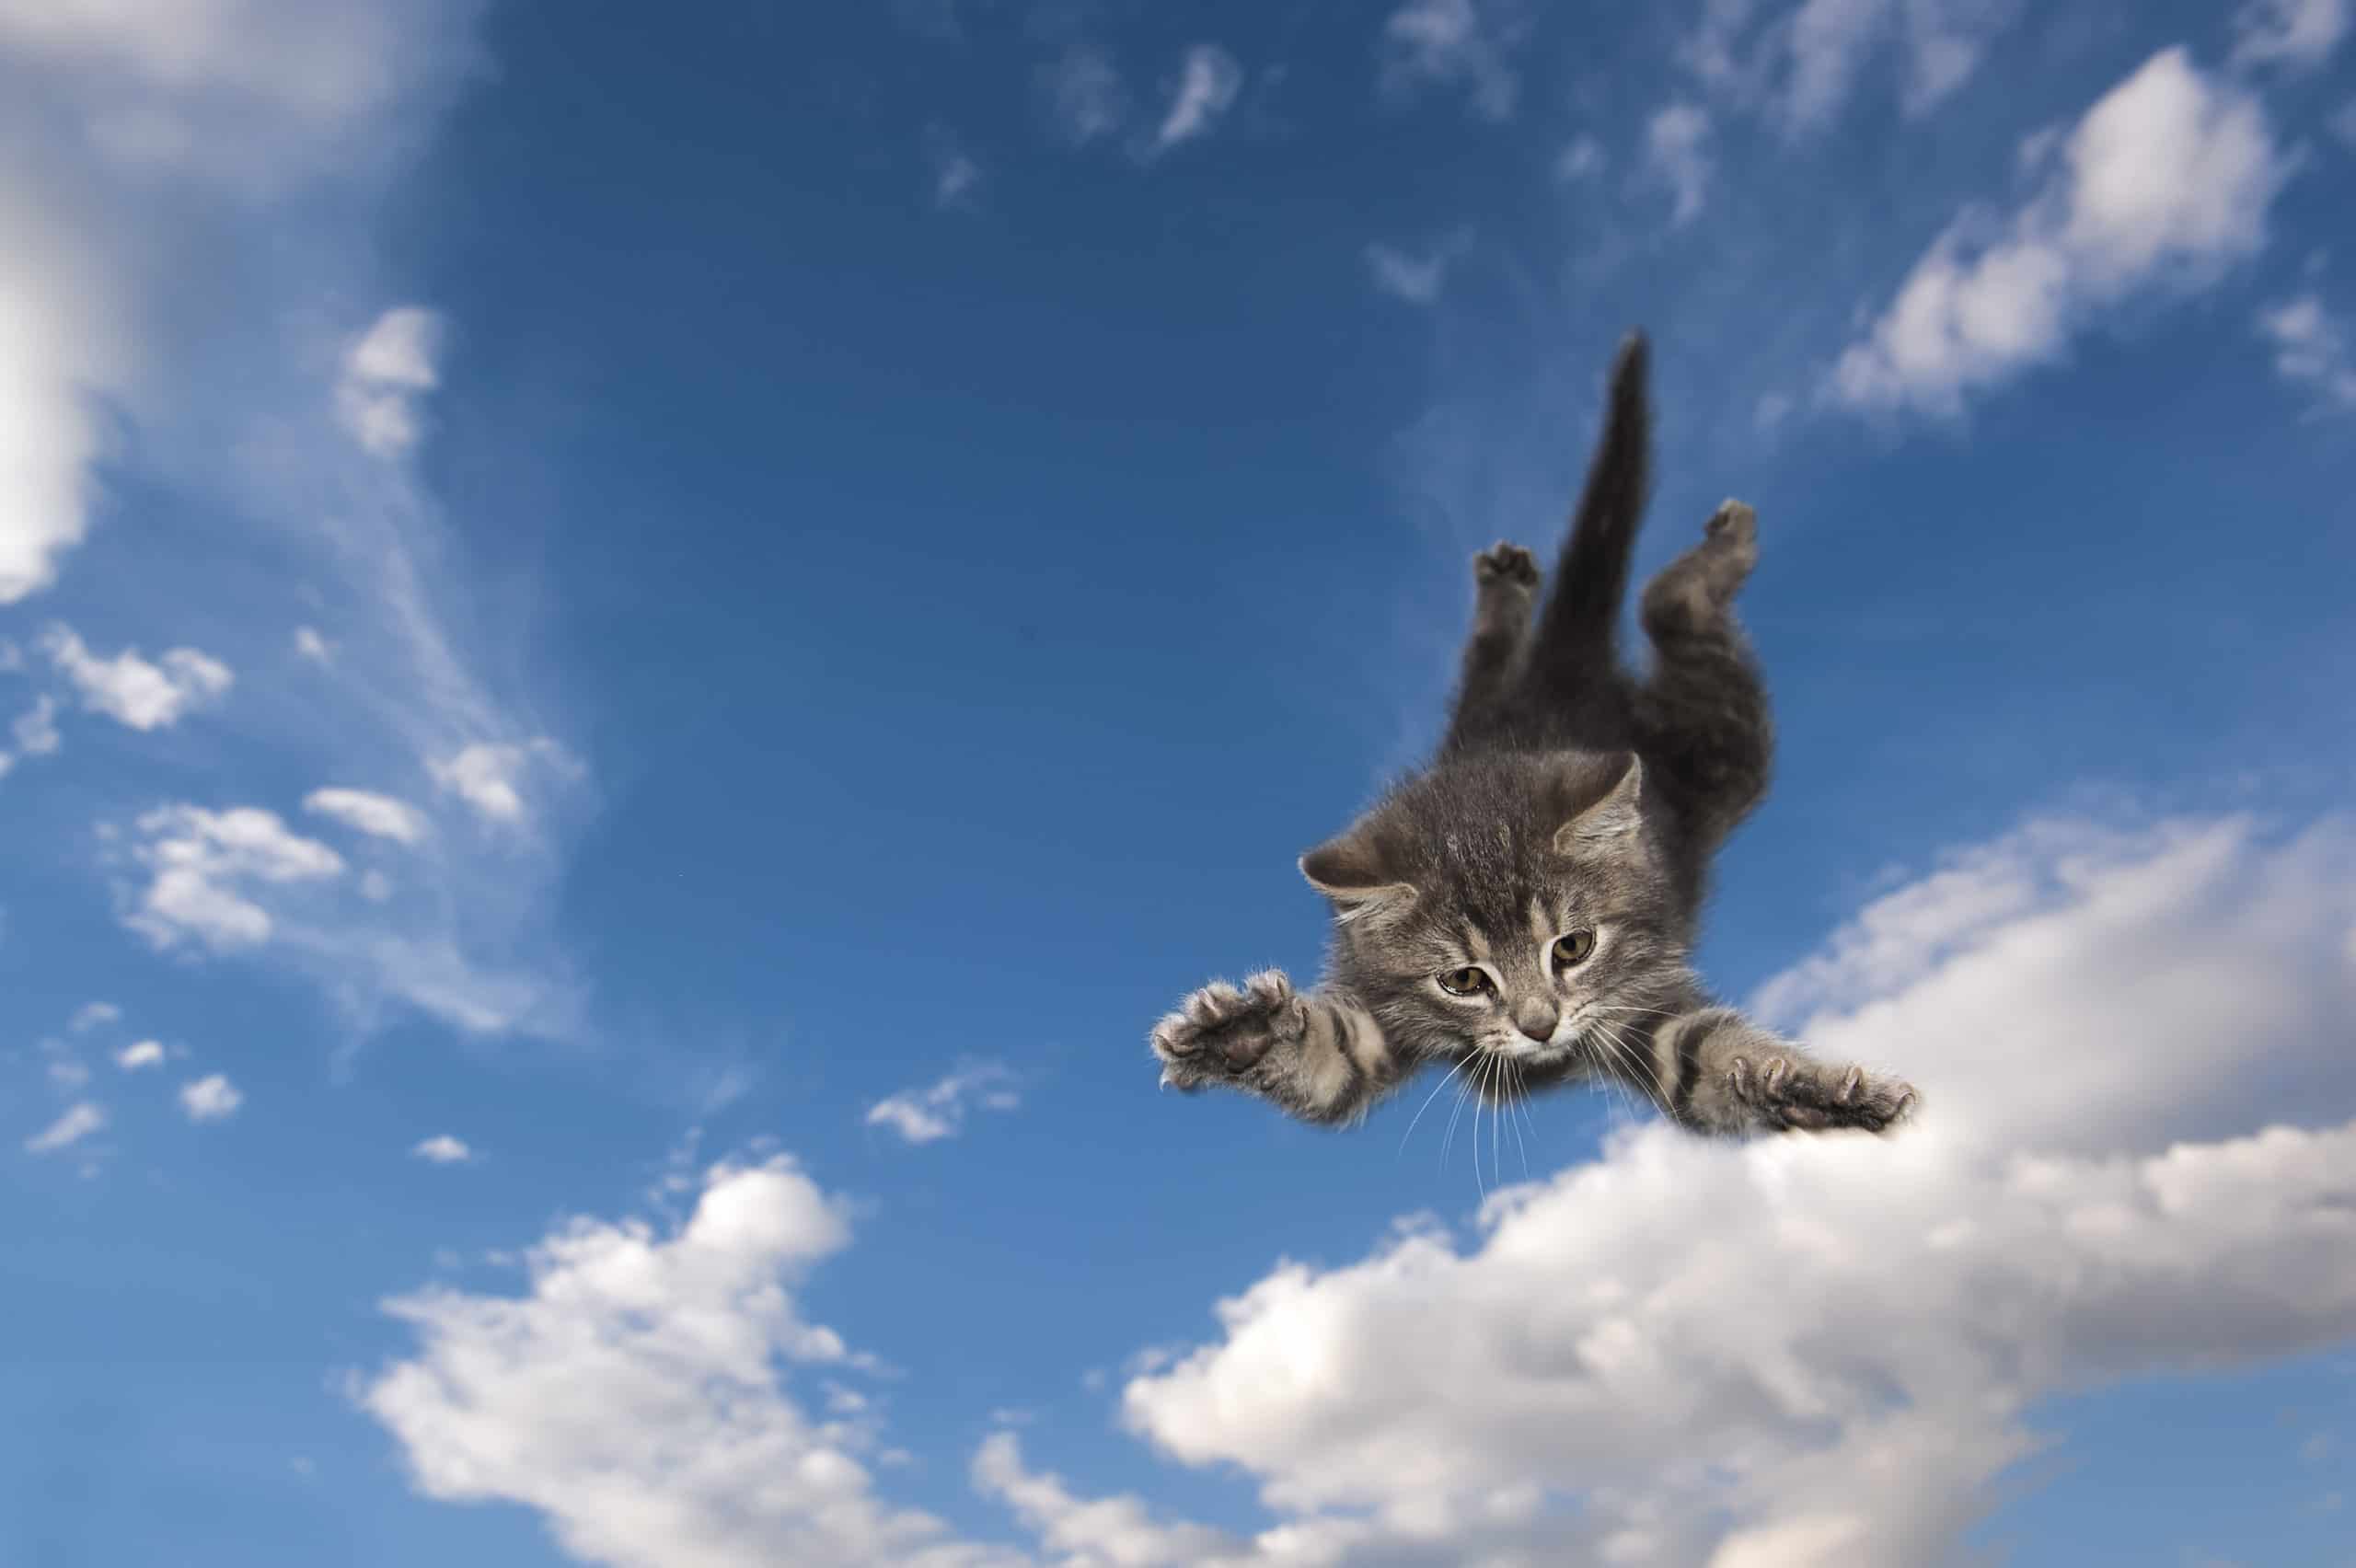 <p>Of course, we should never put our pets at risk–your cat won’t be falling from trees or the top floors of a building if you’re a responsible cat guardian.</p>    <p>But, it’s remarkable that they can <a href="https://a-z-animals.com/blog/discover-why-cats-always-land-on-their-feet/?utm_campaign=msn&utm_source=msn_slideshow&utm_content=1255676&utm_medium=in_content">land on their feet</a>, sometimes without injury, from falls that most dogs wouldn’t survive. This is due to their righting reflex, which causes them to turn while falling in order to land upright.</p>    <p>However, cats can still get hurt from a fall–even a minor one. There are many factors that determine their injuries upon landing, including where they fall from, how they land, and their overall health.</p>